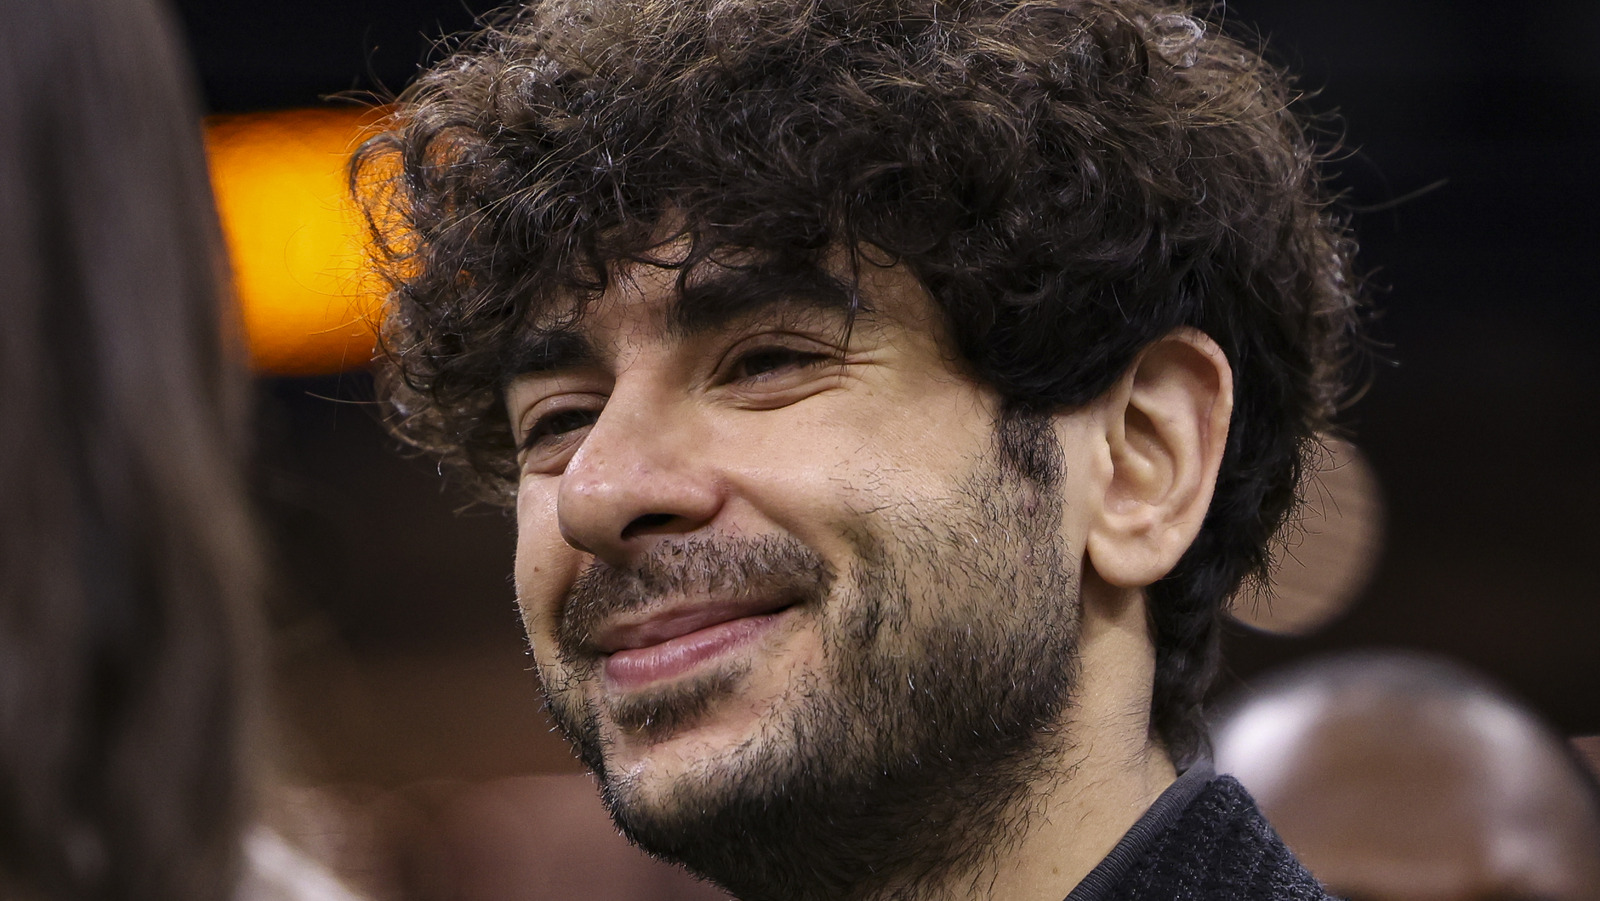 Tony Khan Discusses Prospect Of Streaming AEW PPVs, Video Library On MAX